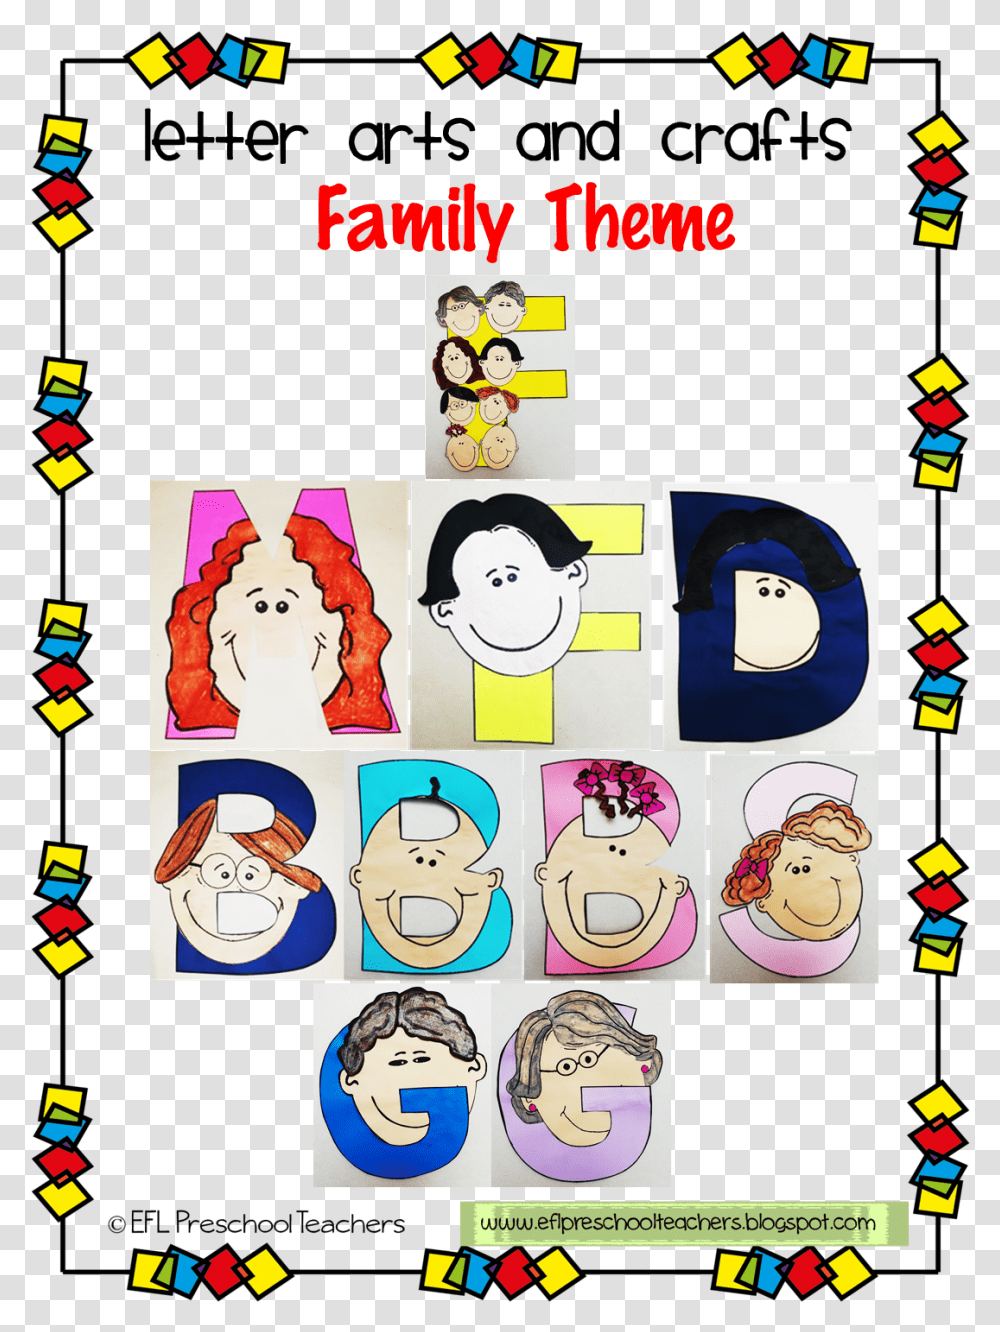 And There Is The Letter Arts And Crafts For The Family Arts And Crafts About Family, Label, Super Mario, Comics Transparent Png